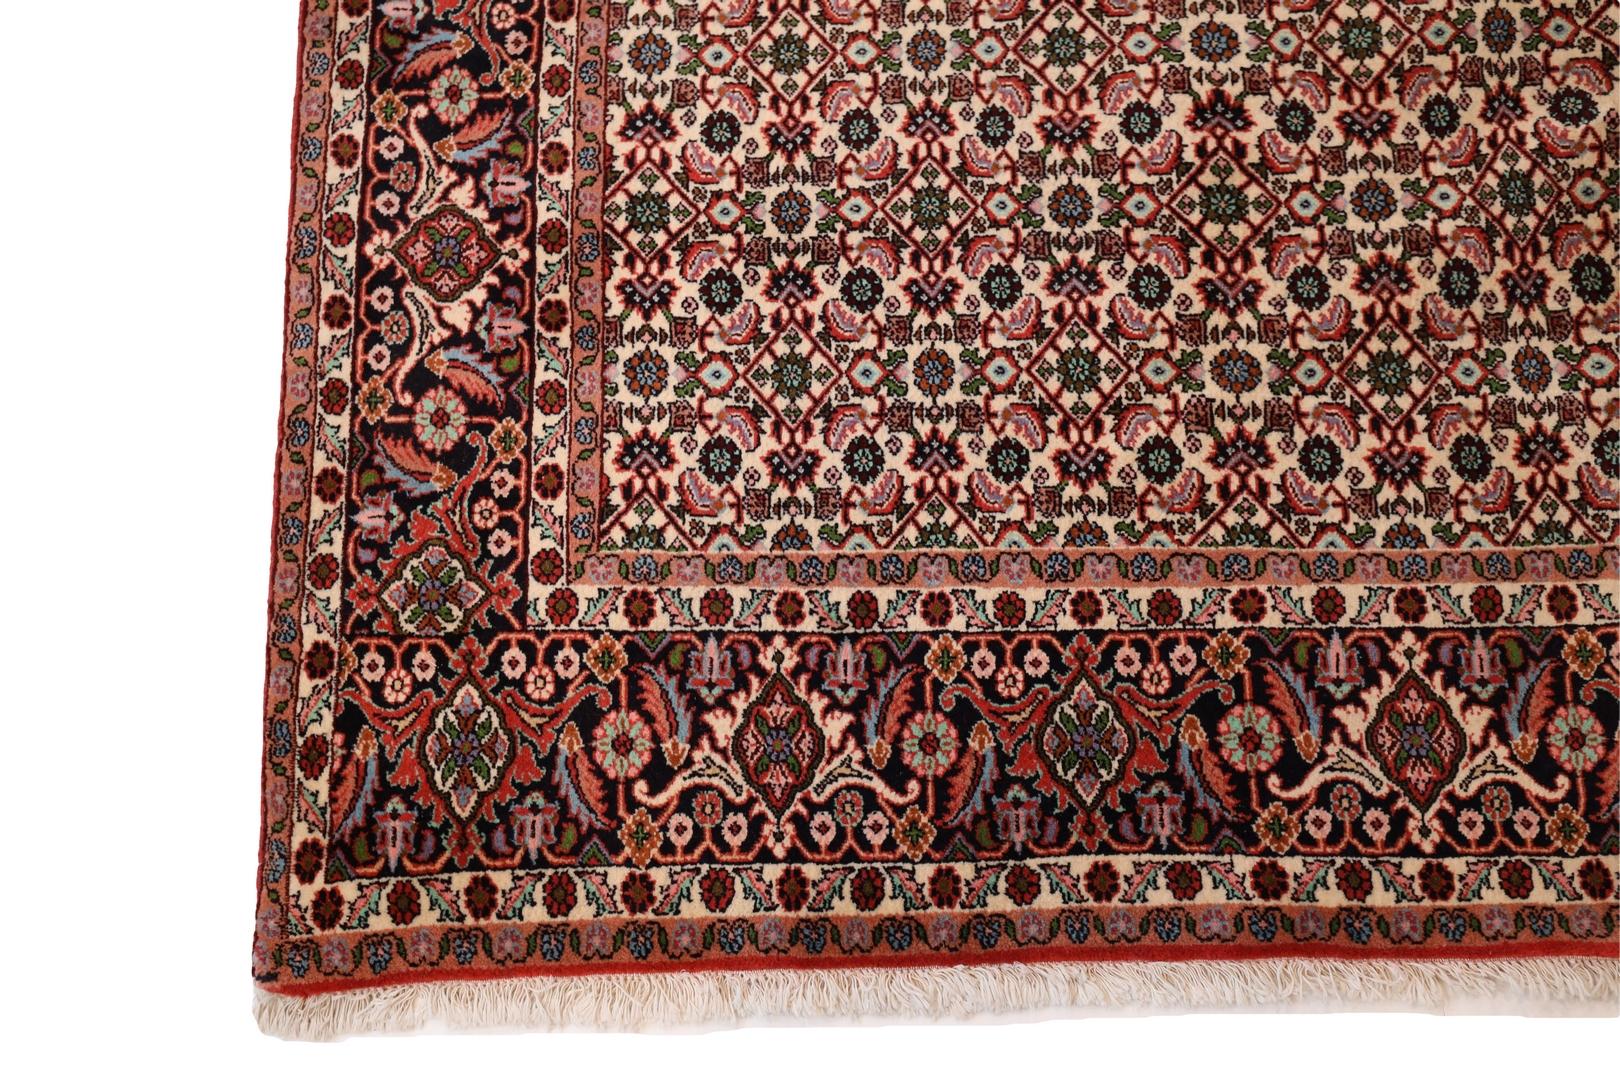 A Bijar rug is a hand-woven Persian rug that comes from the city of Bijar in the western part of Iran. This particular Bijar rug has an ivory background with a beautiful all-over geometric floral design. The design is comprised of thin and tight